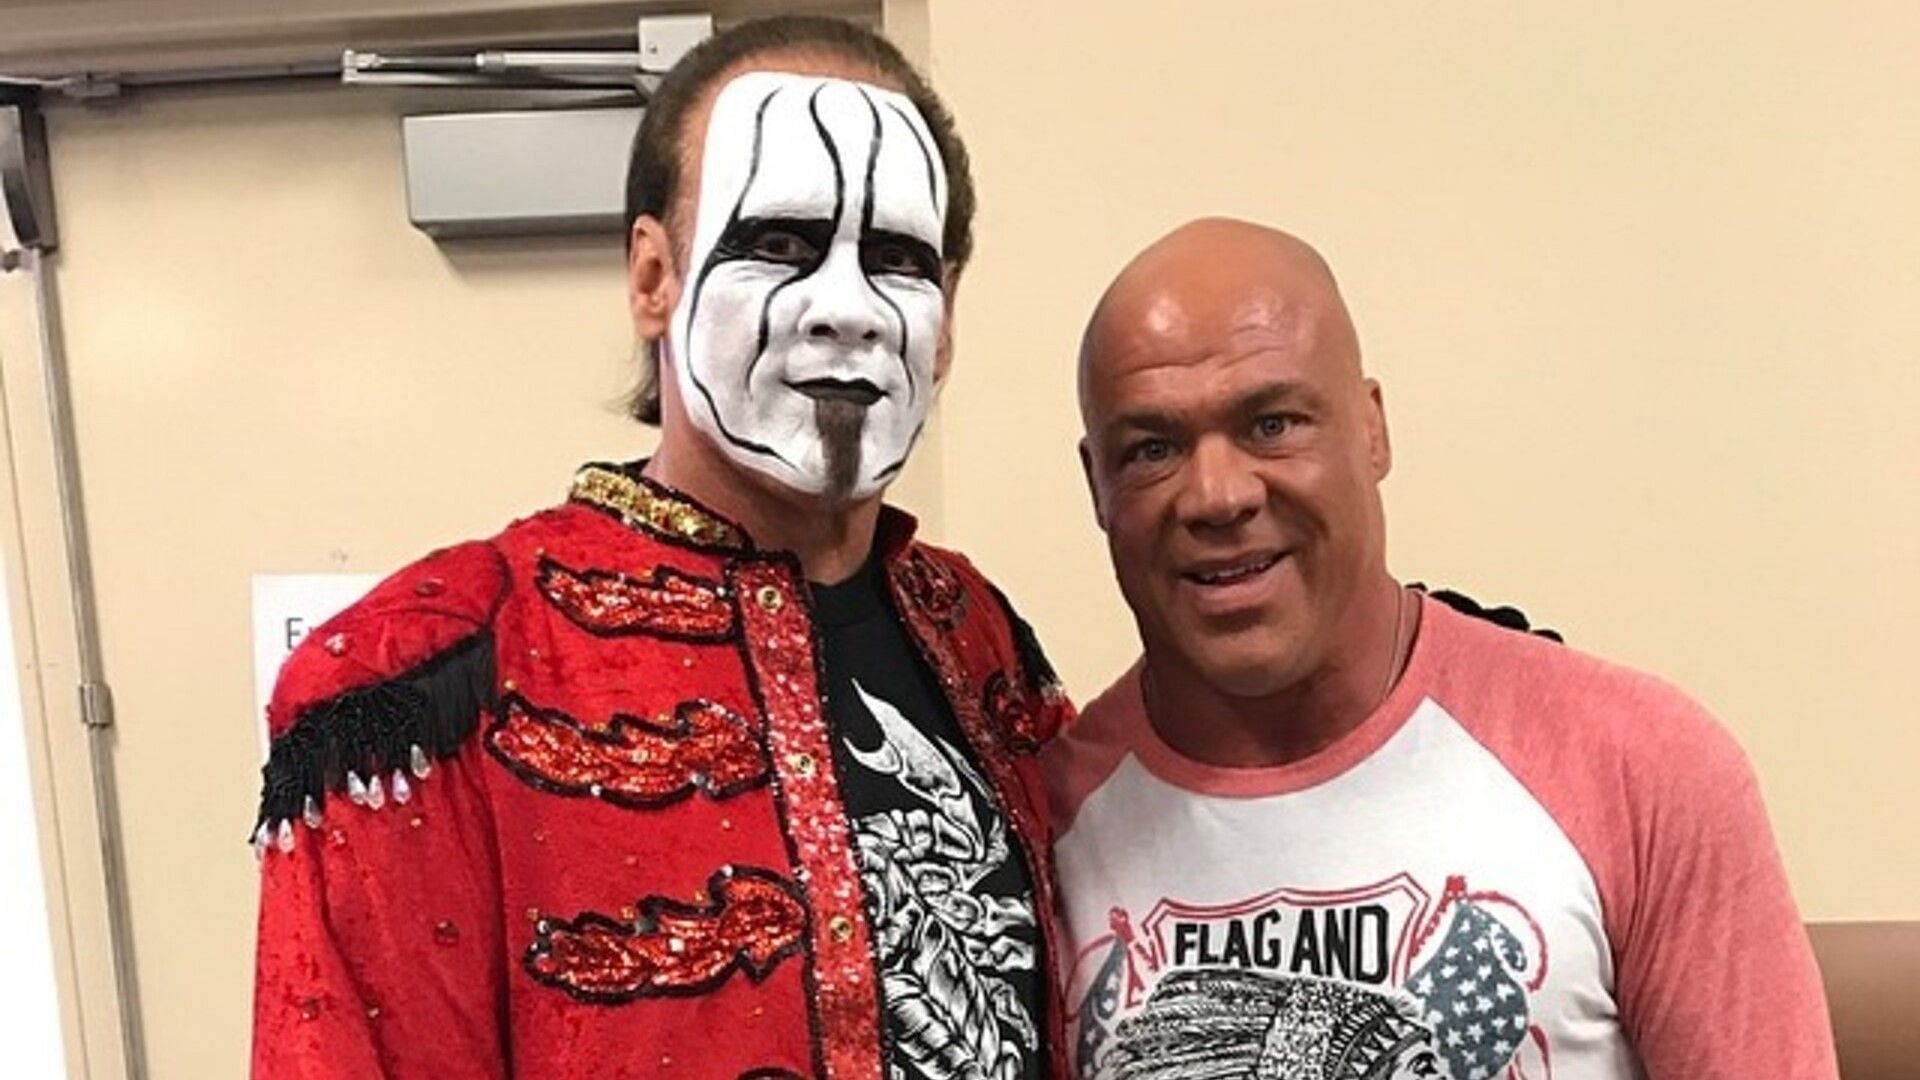 WWE/TNA legends Sting and Kurt Angle reunite at convention in 2017